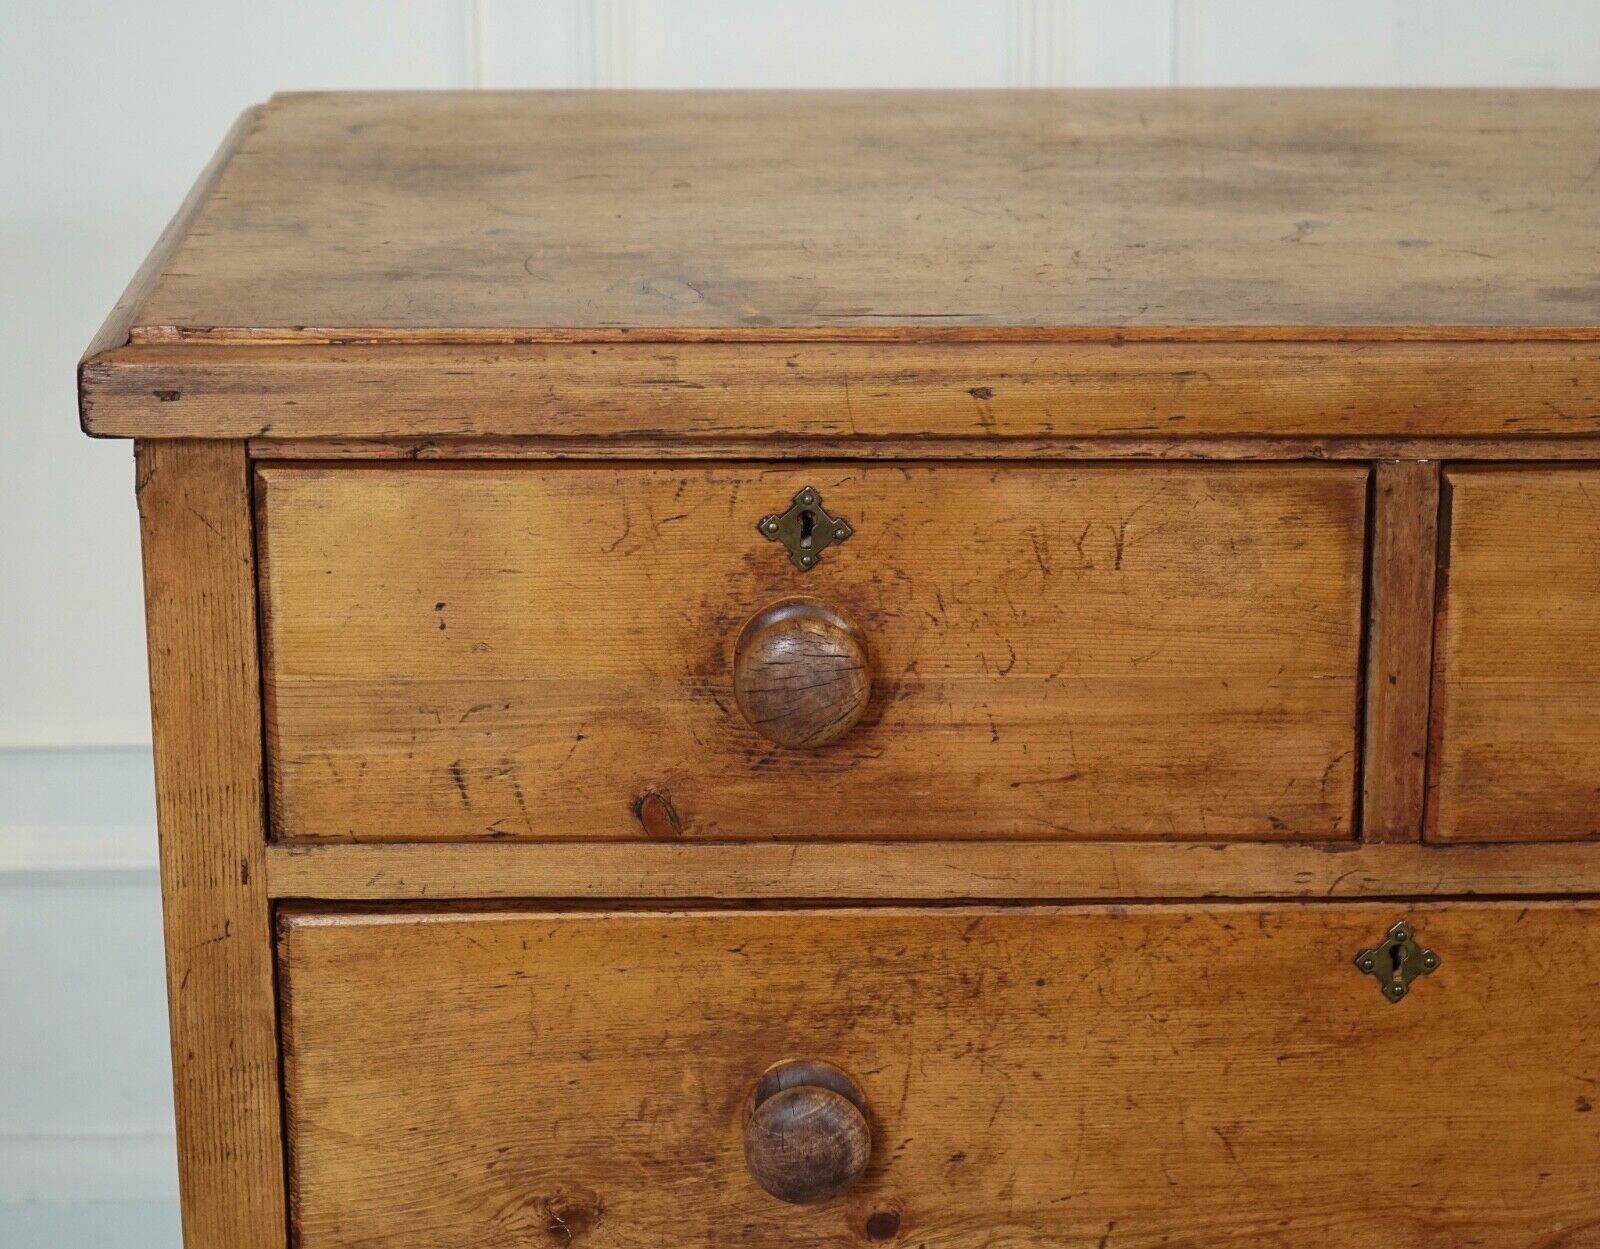 ANTIQUE LATE VICTORIAN PINE CHEST OF DRAWERS WITH ORIGINAL TURNED WOODEN HANDLES